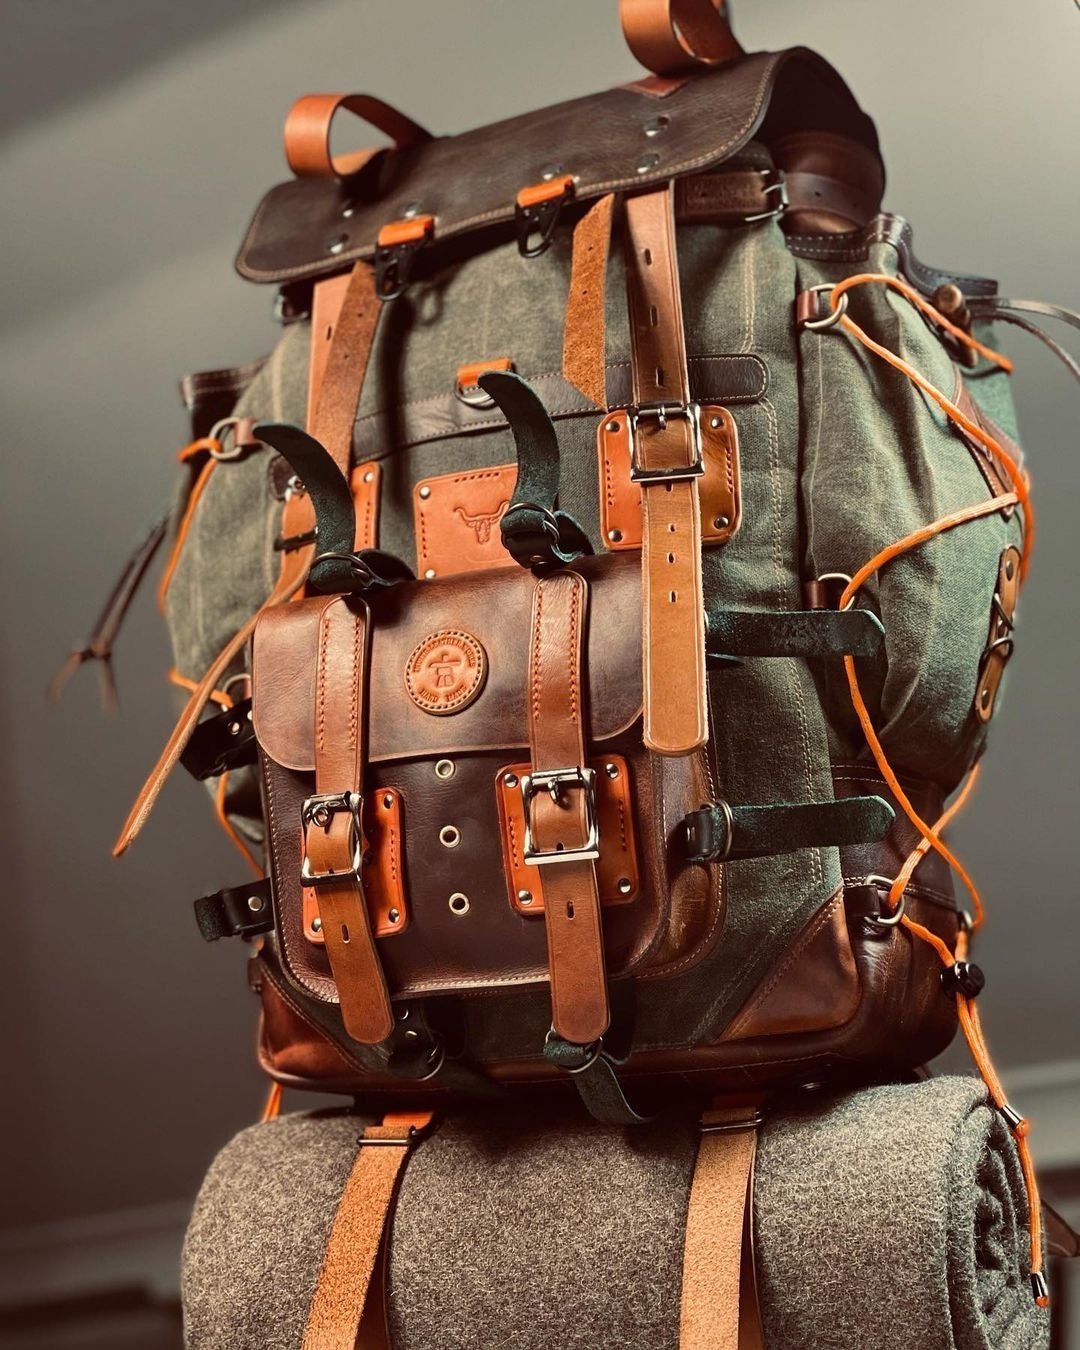 Camping Backpacks | Camping Backpacks | Green Backpack | Camping Design Awards | Handmade Leather and Waxed Backpack for Travel, Camping,Military, Hiking | 45 Liter | Personalization bushcraft - camping - hiking backpack 99percenthandmade   